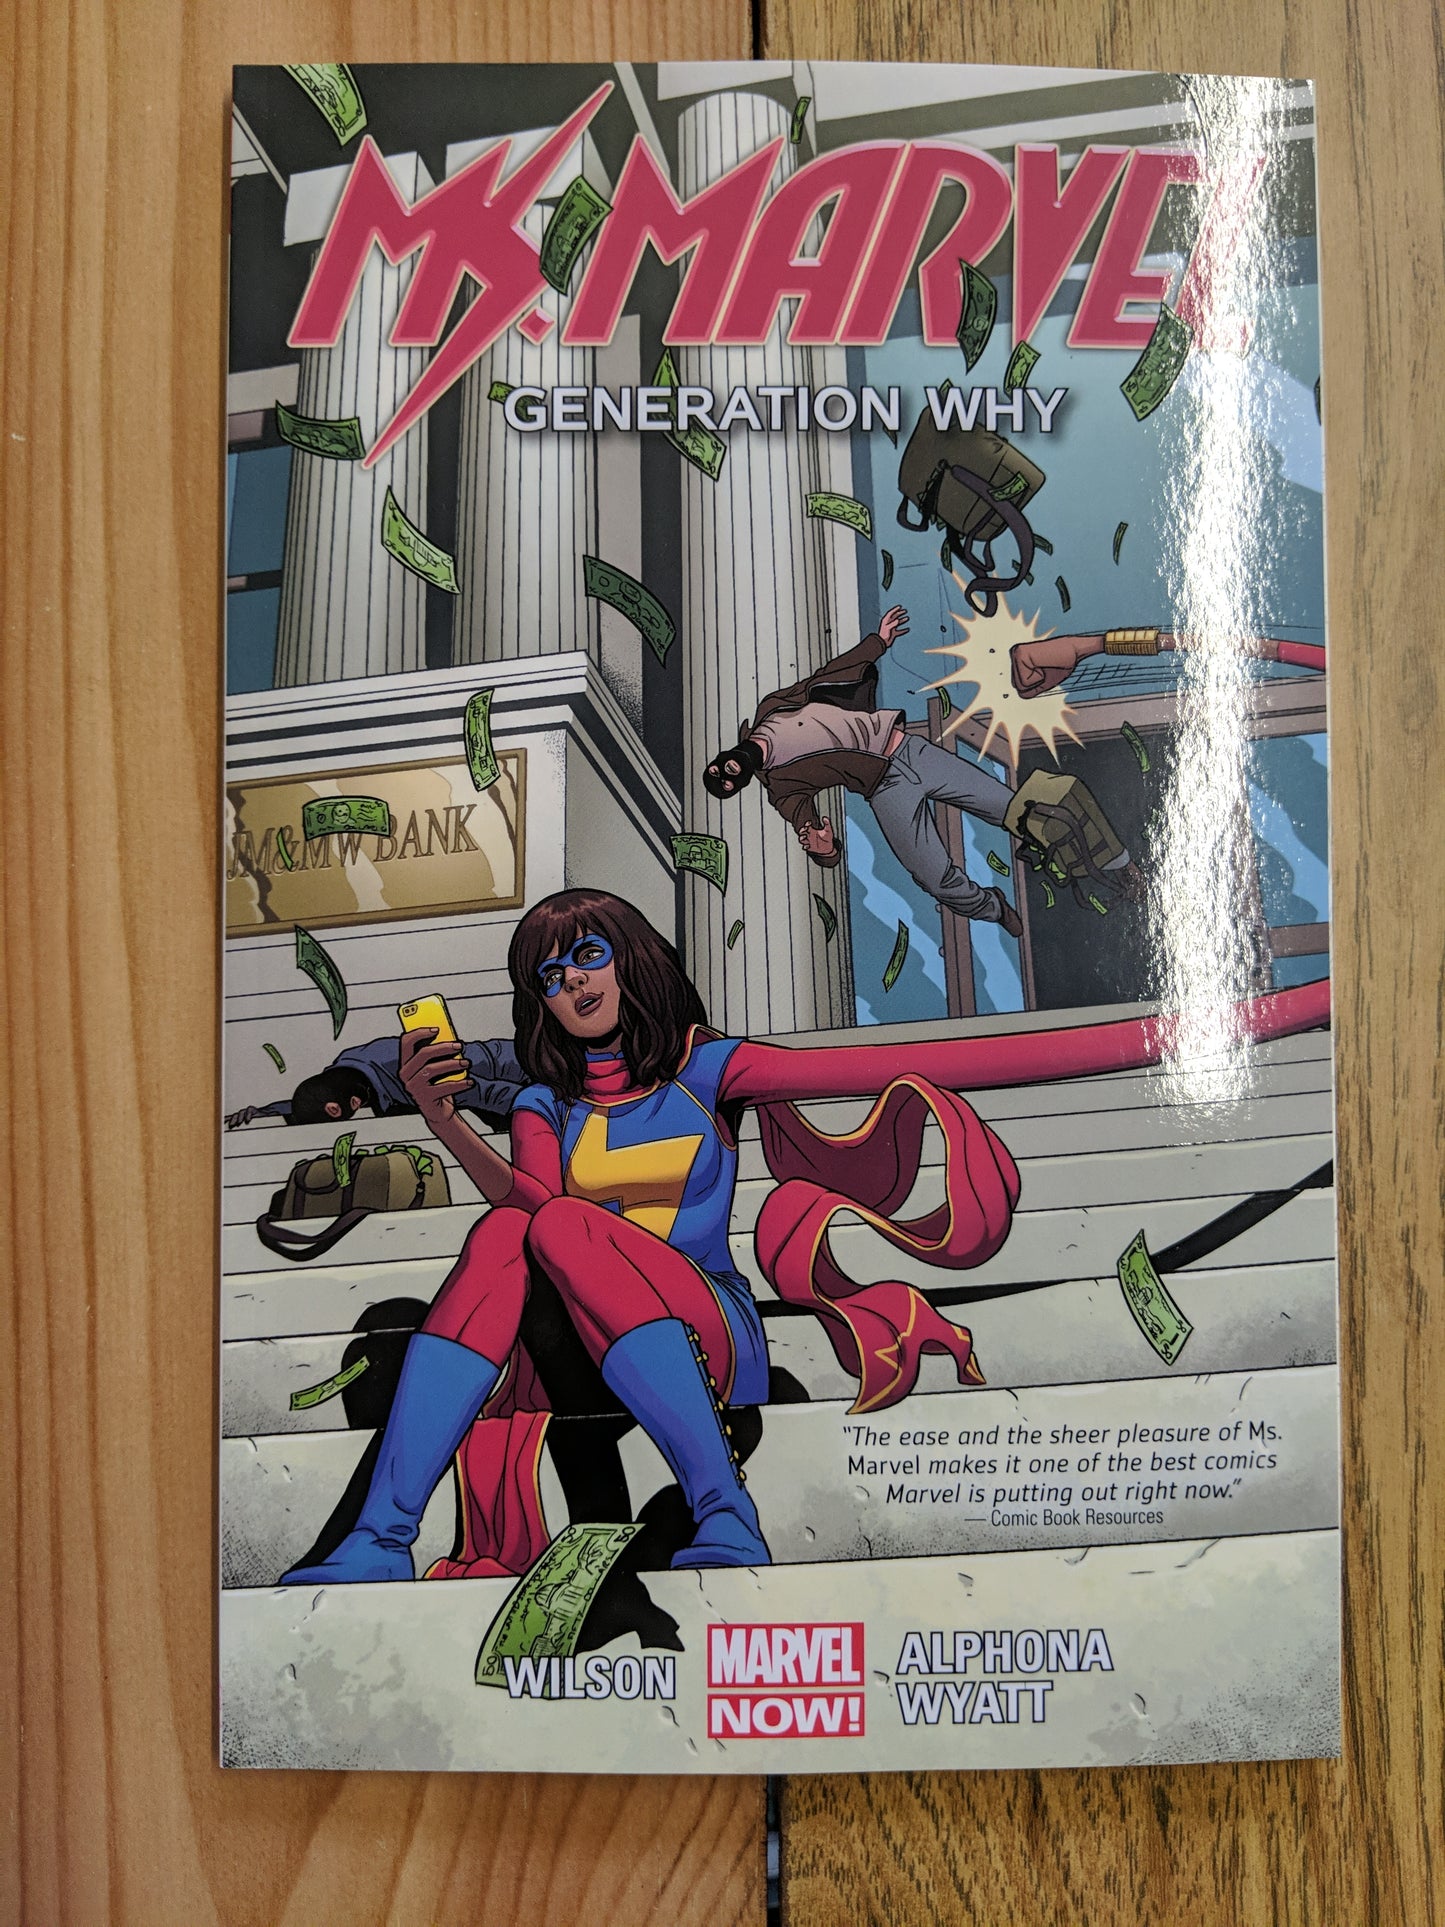 Ms. Marvel: Generation Why (#2)